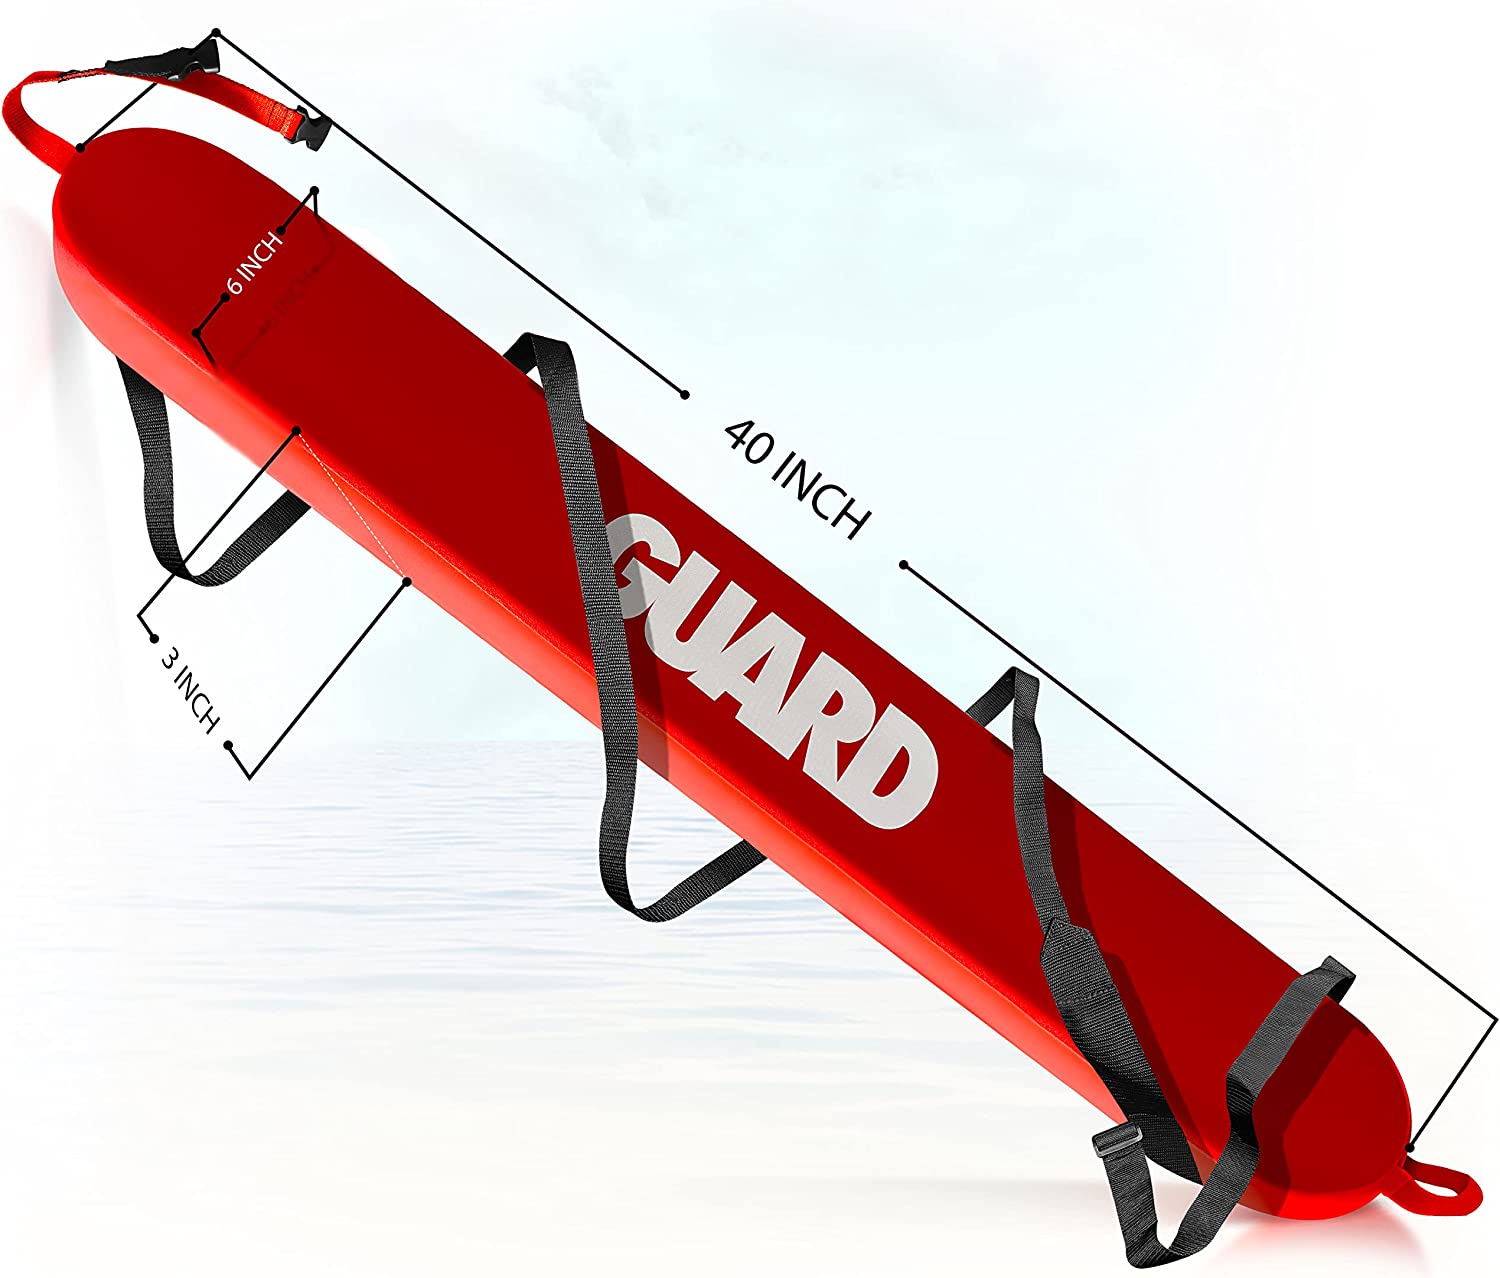 ASA Techmed - 50" Red Lifeguard Rescue Tube - Includes CPR Kit and First Aid Kit - Matching Red Whistle Included (40 Inch) - image 2 of 8